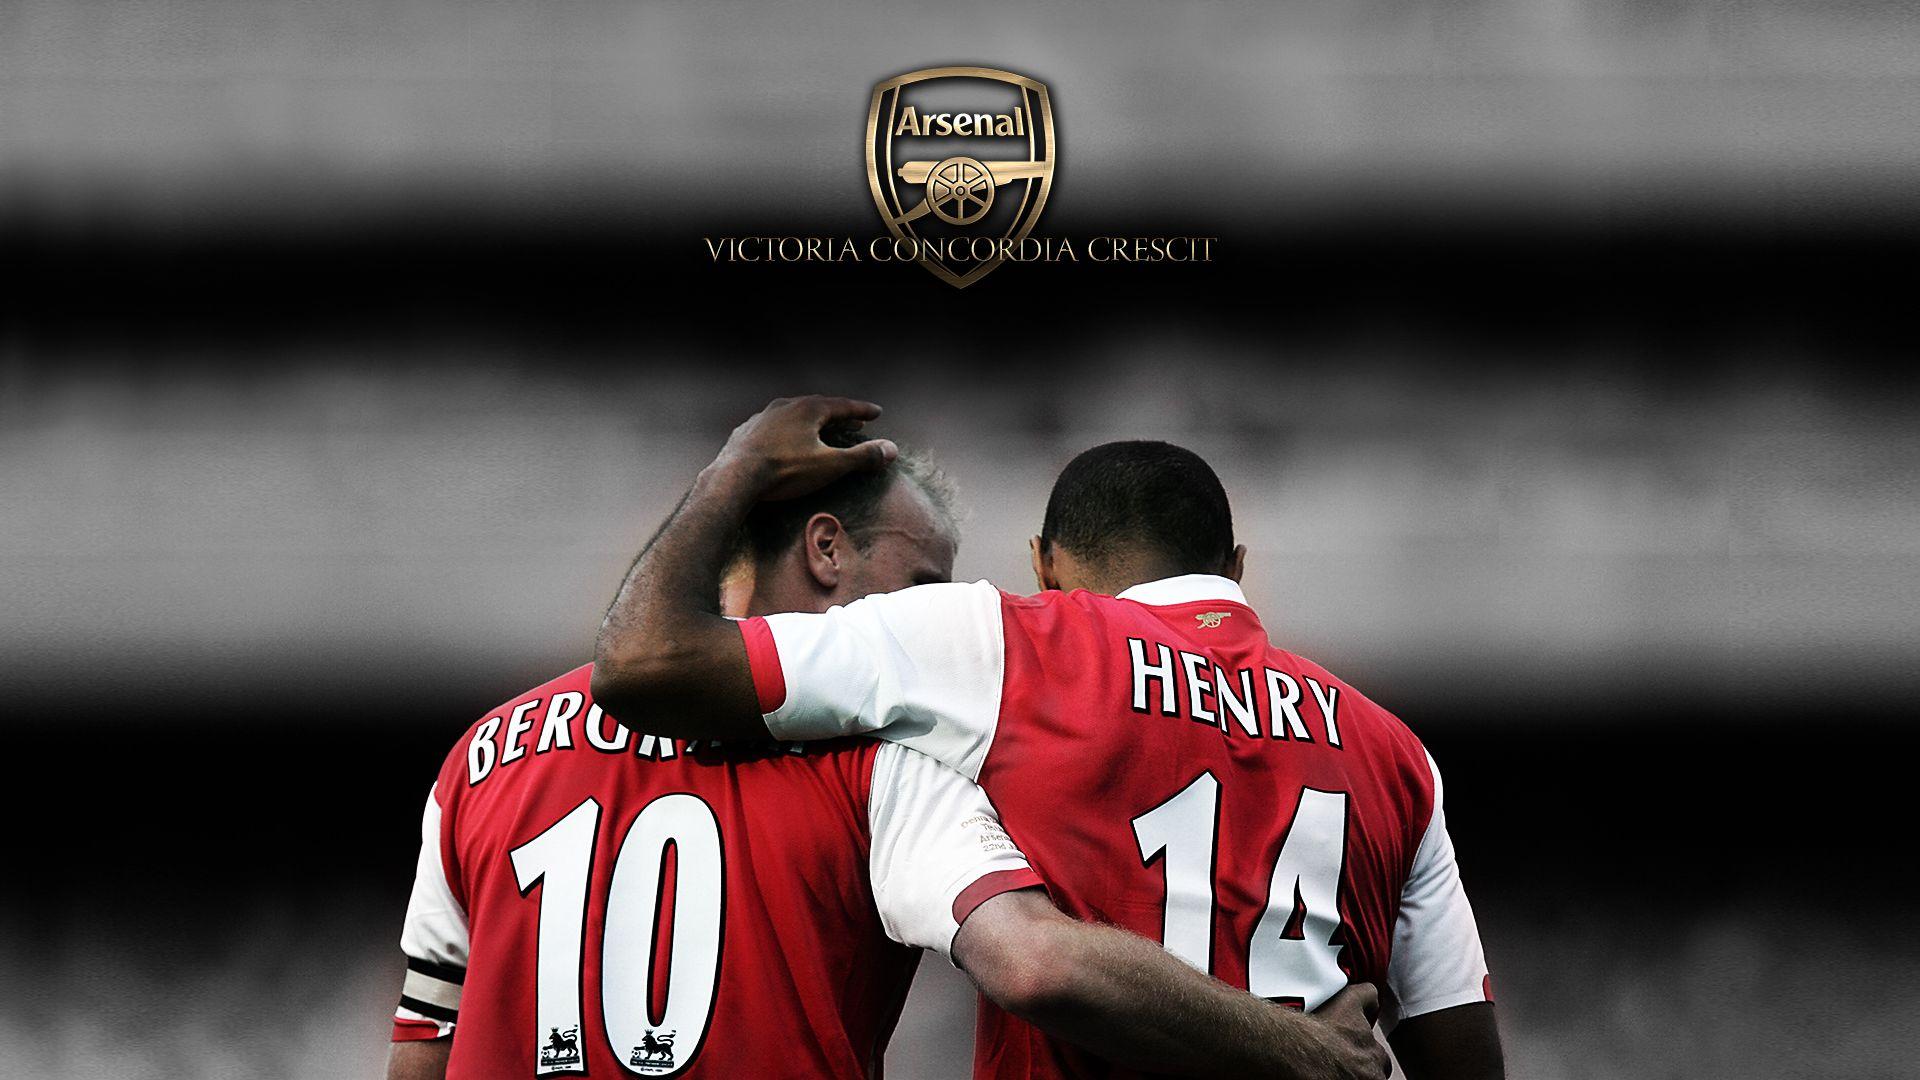 Arsenal Legends Dennis Bergkamp and Thierry Henry